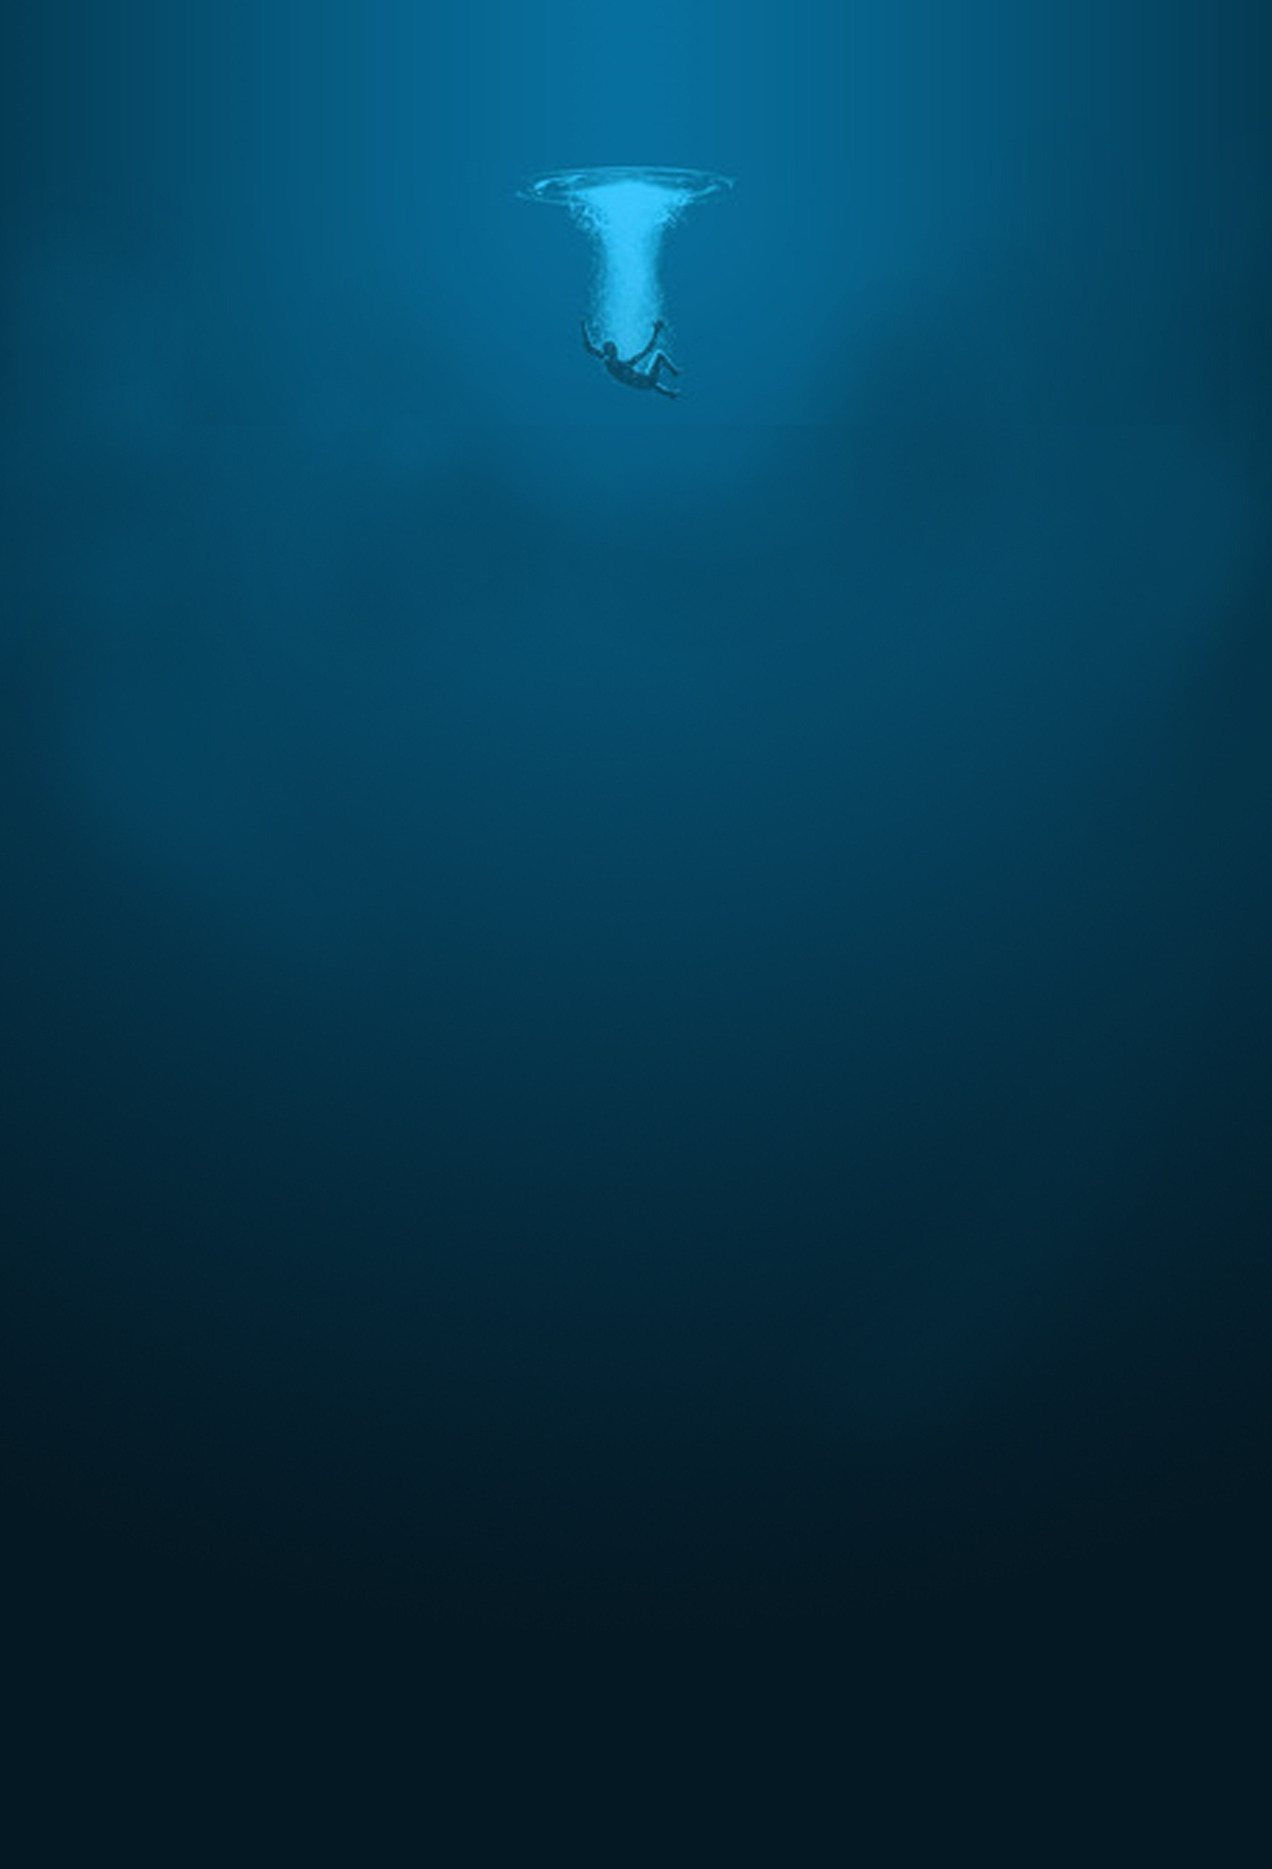 abethehero: Right now this is how i feel, i feel like am drowning into a sea but that sea is my thoughts am drowning into my thoughts i need someone to pull me out 